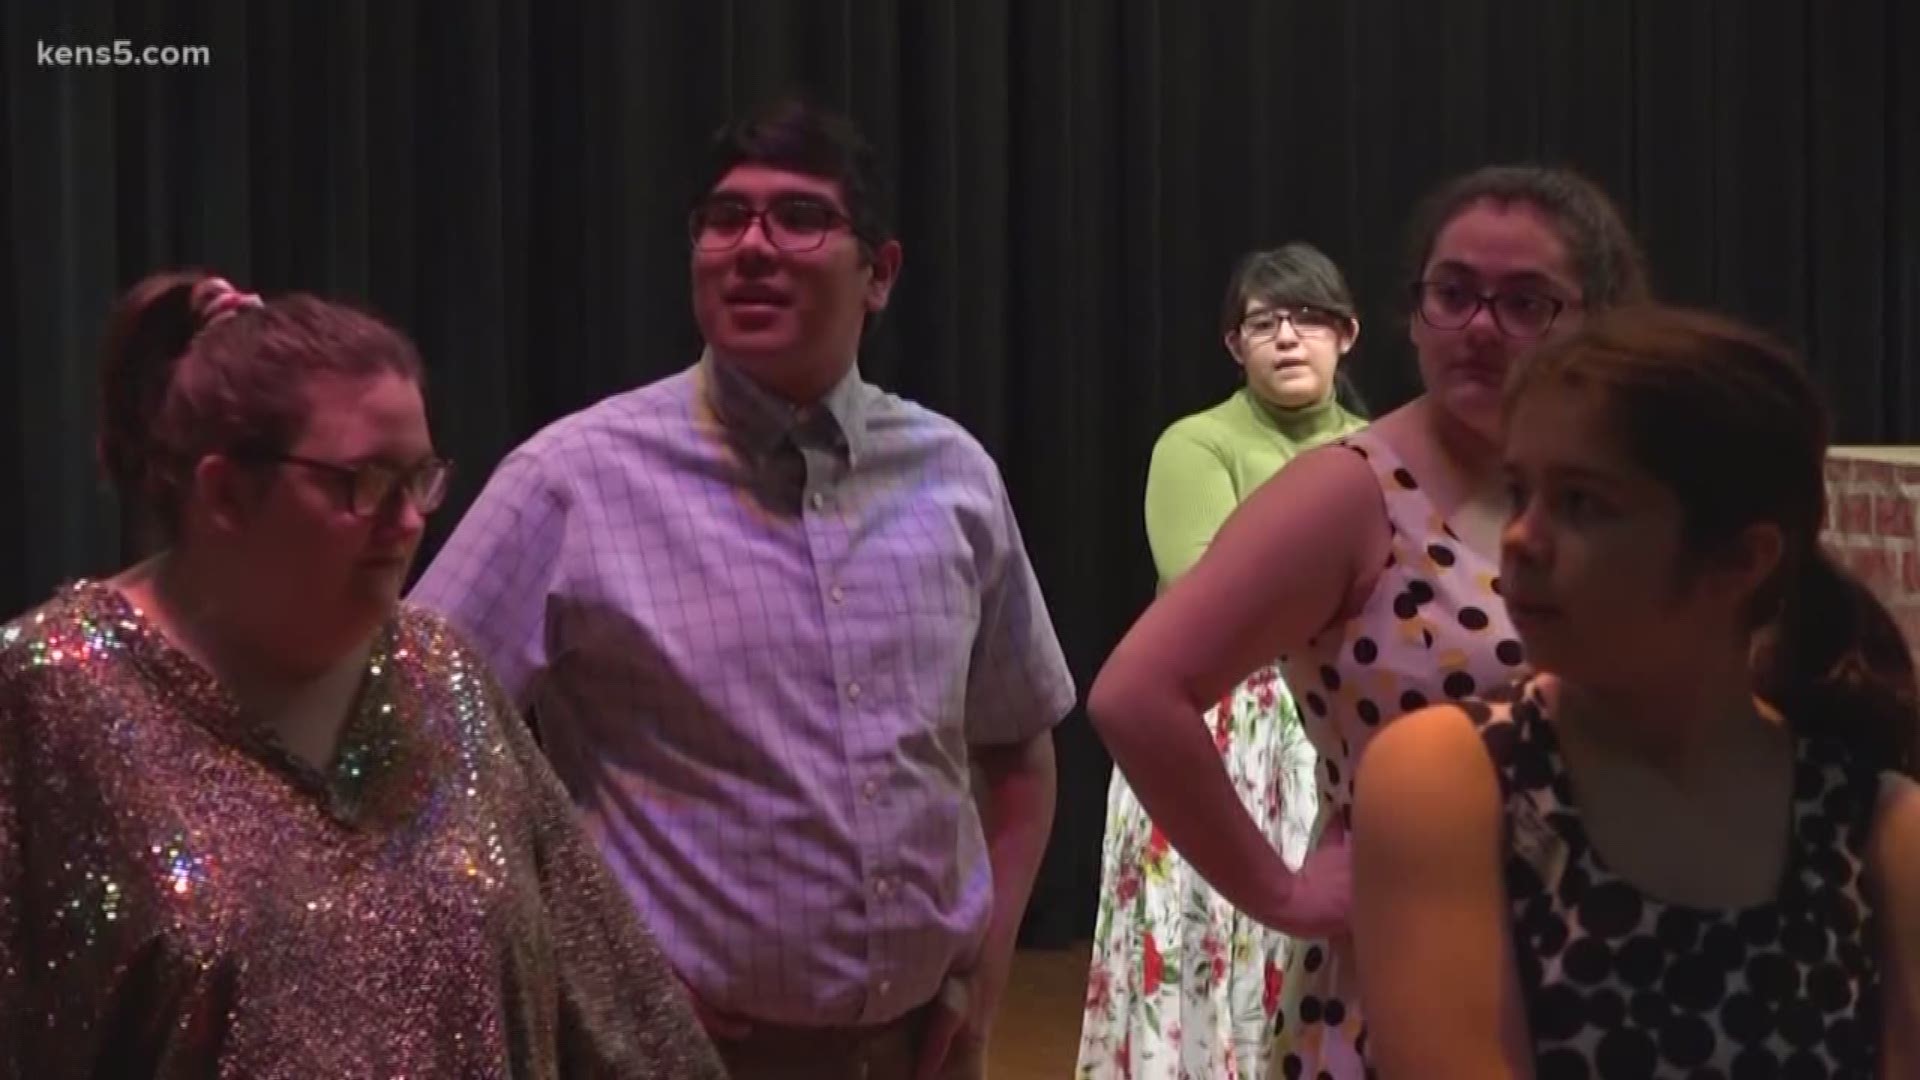 Four San Antonio I-S-D high schools are working together on a theater production of Hairspray. Leah Durain shows us how the project is demonstrating acceptance of people from a variety of backgrounds.